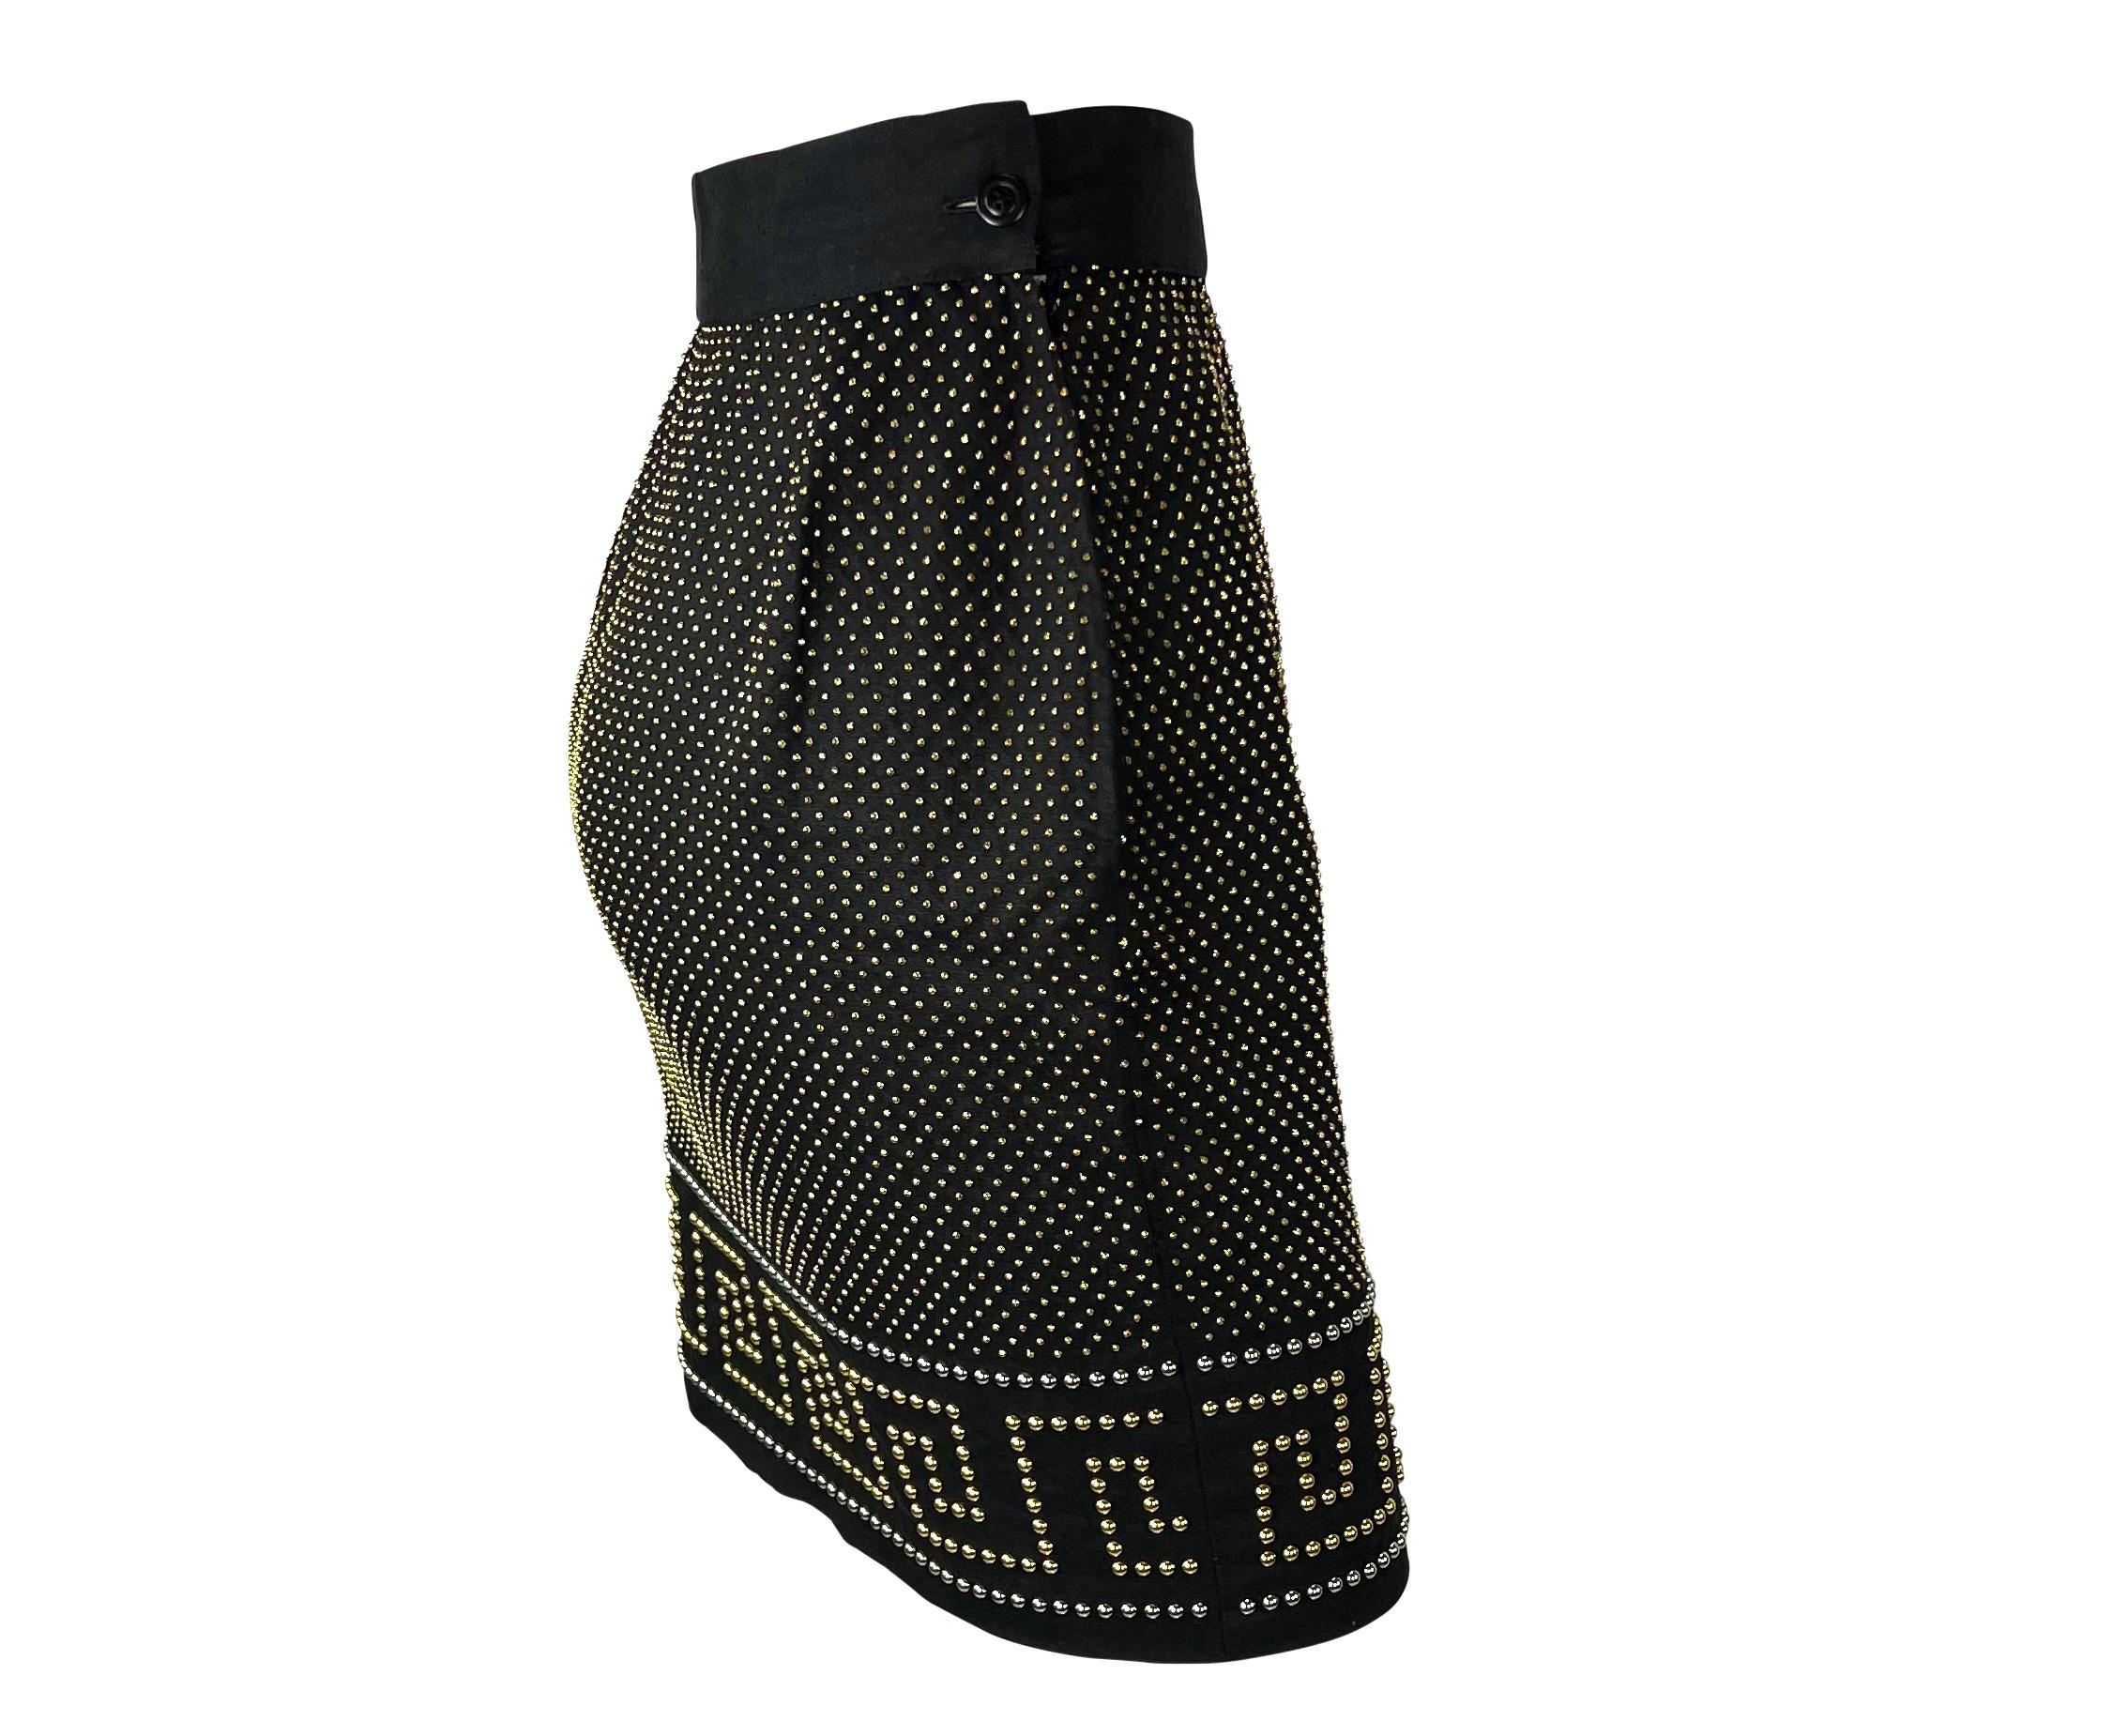 F/W 1992 Gianni Versace Couture 'Miss S&M' Studded Greek Key Skirt For Sale 4